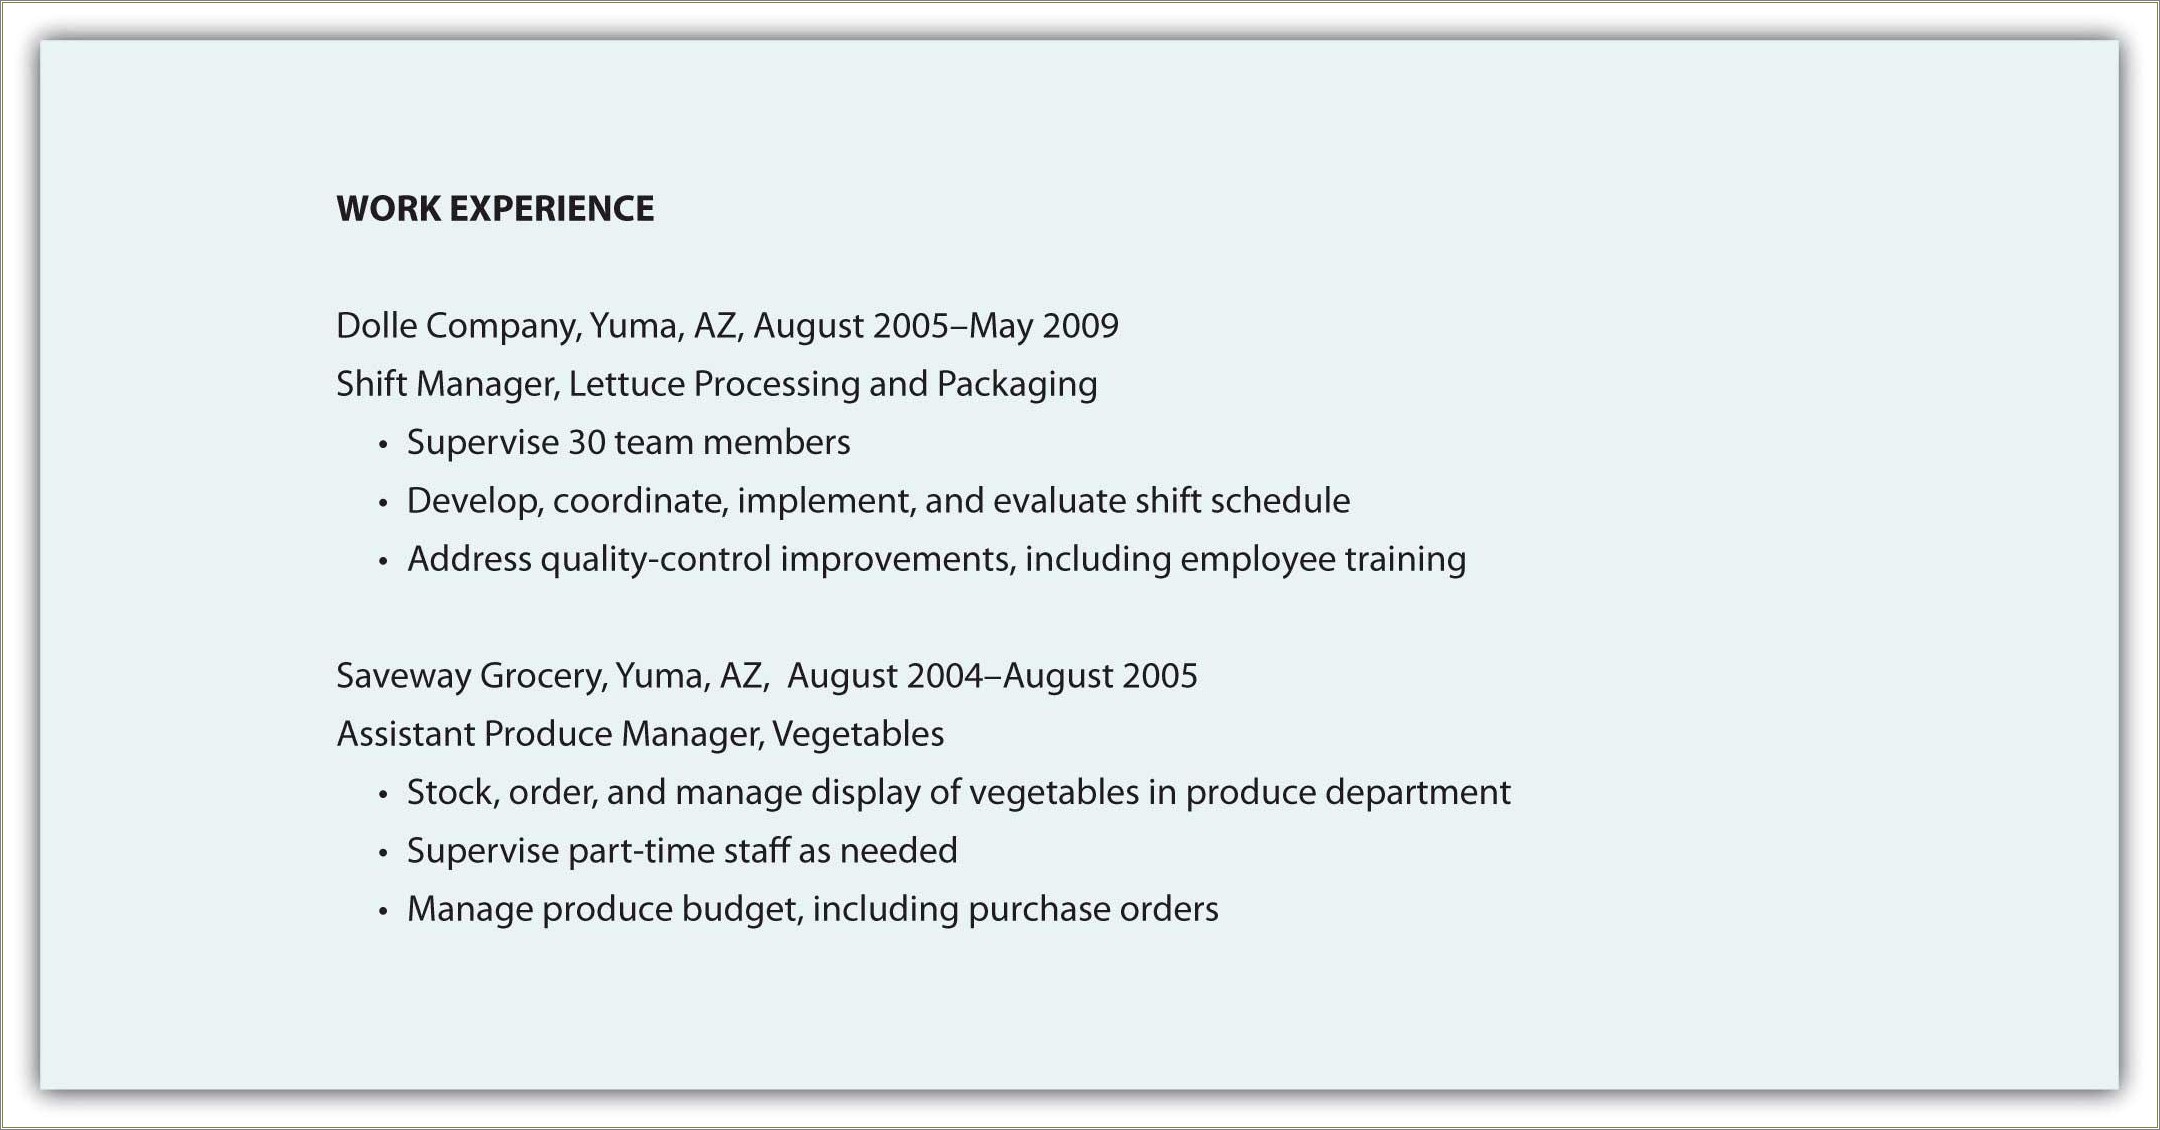 Resume Writing For Different Work Experience